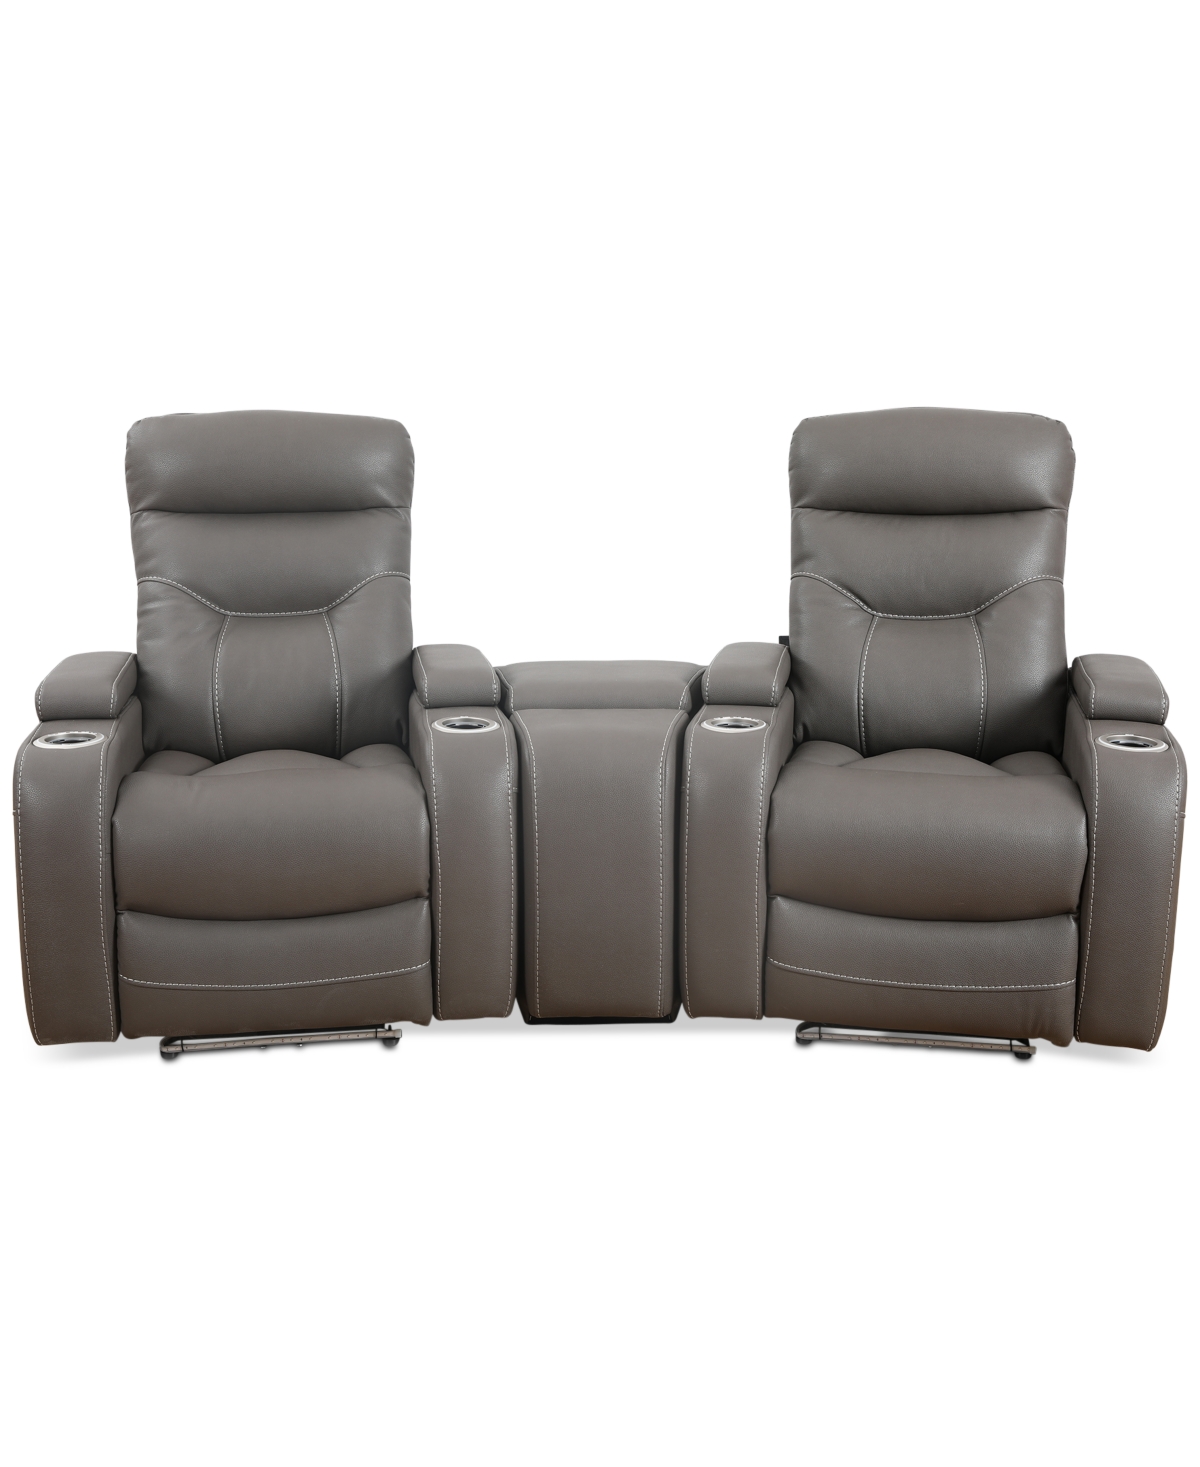 Furniture Jabarr 3-pc. Beyond Leather Theater Seating With 1 Console, Created For Macy's In Grey